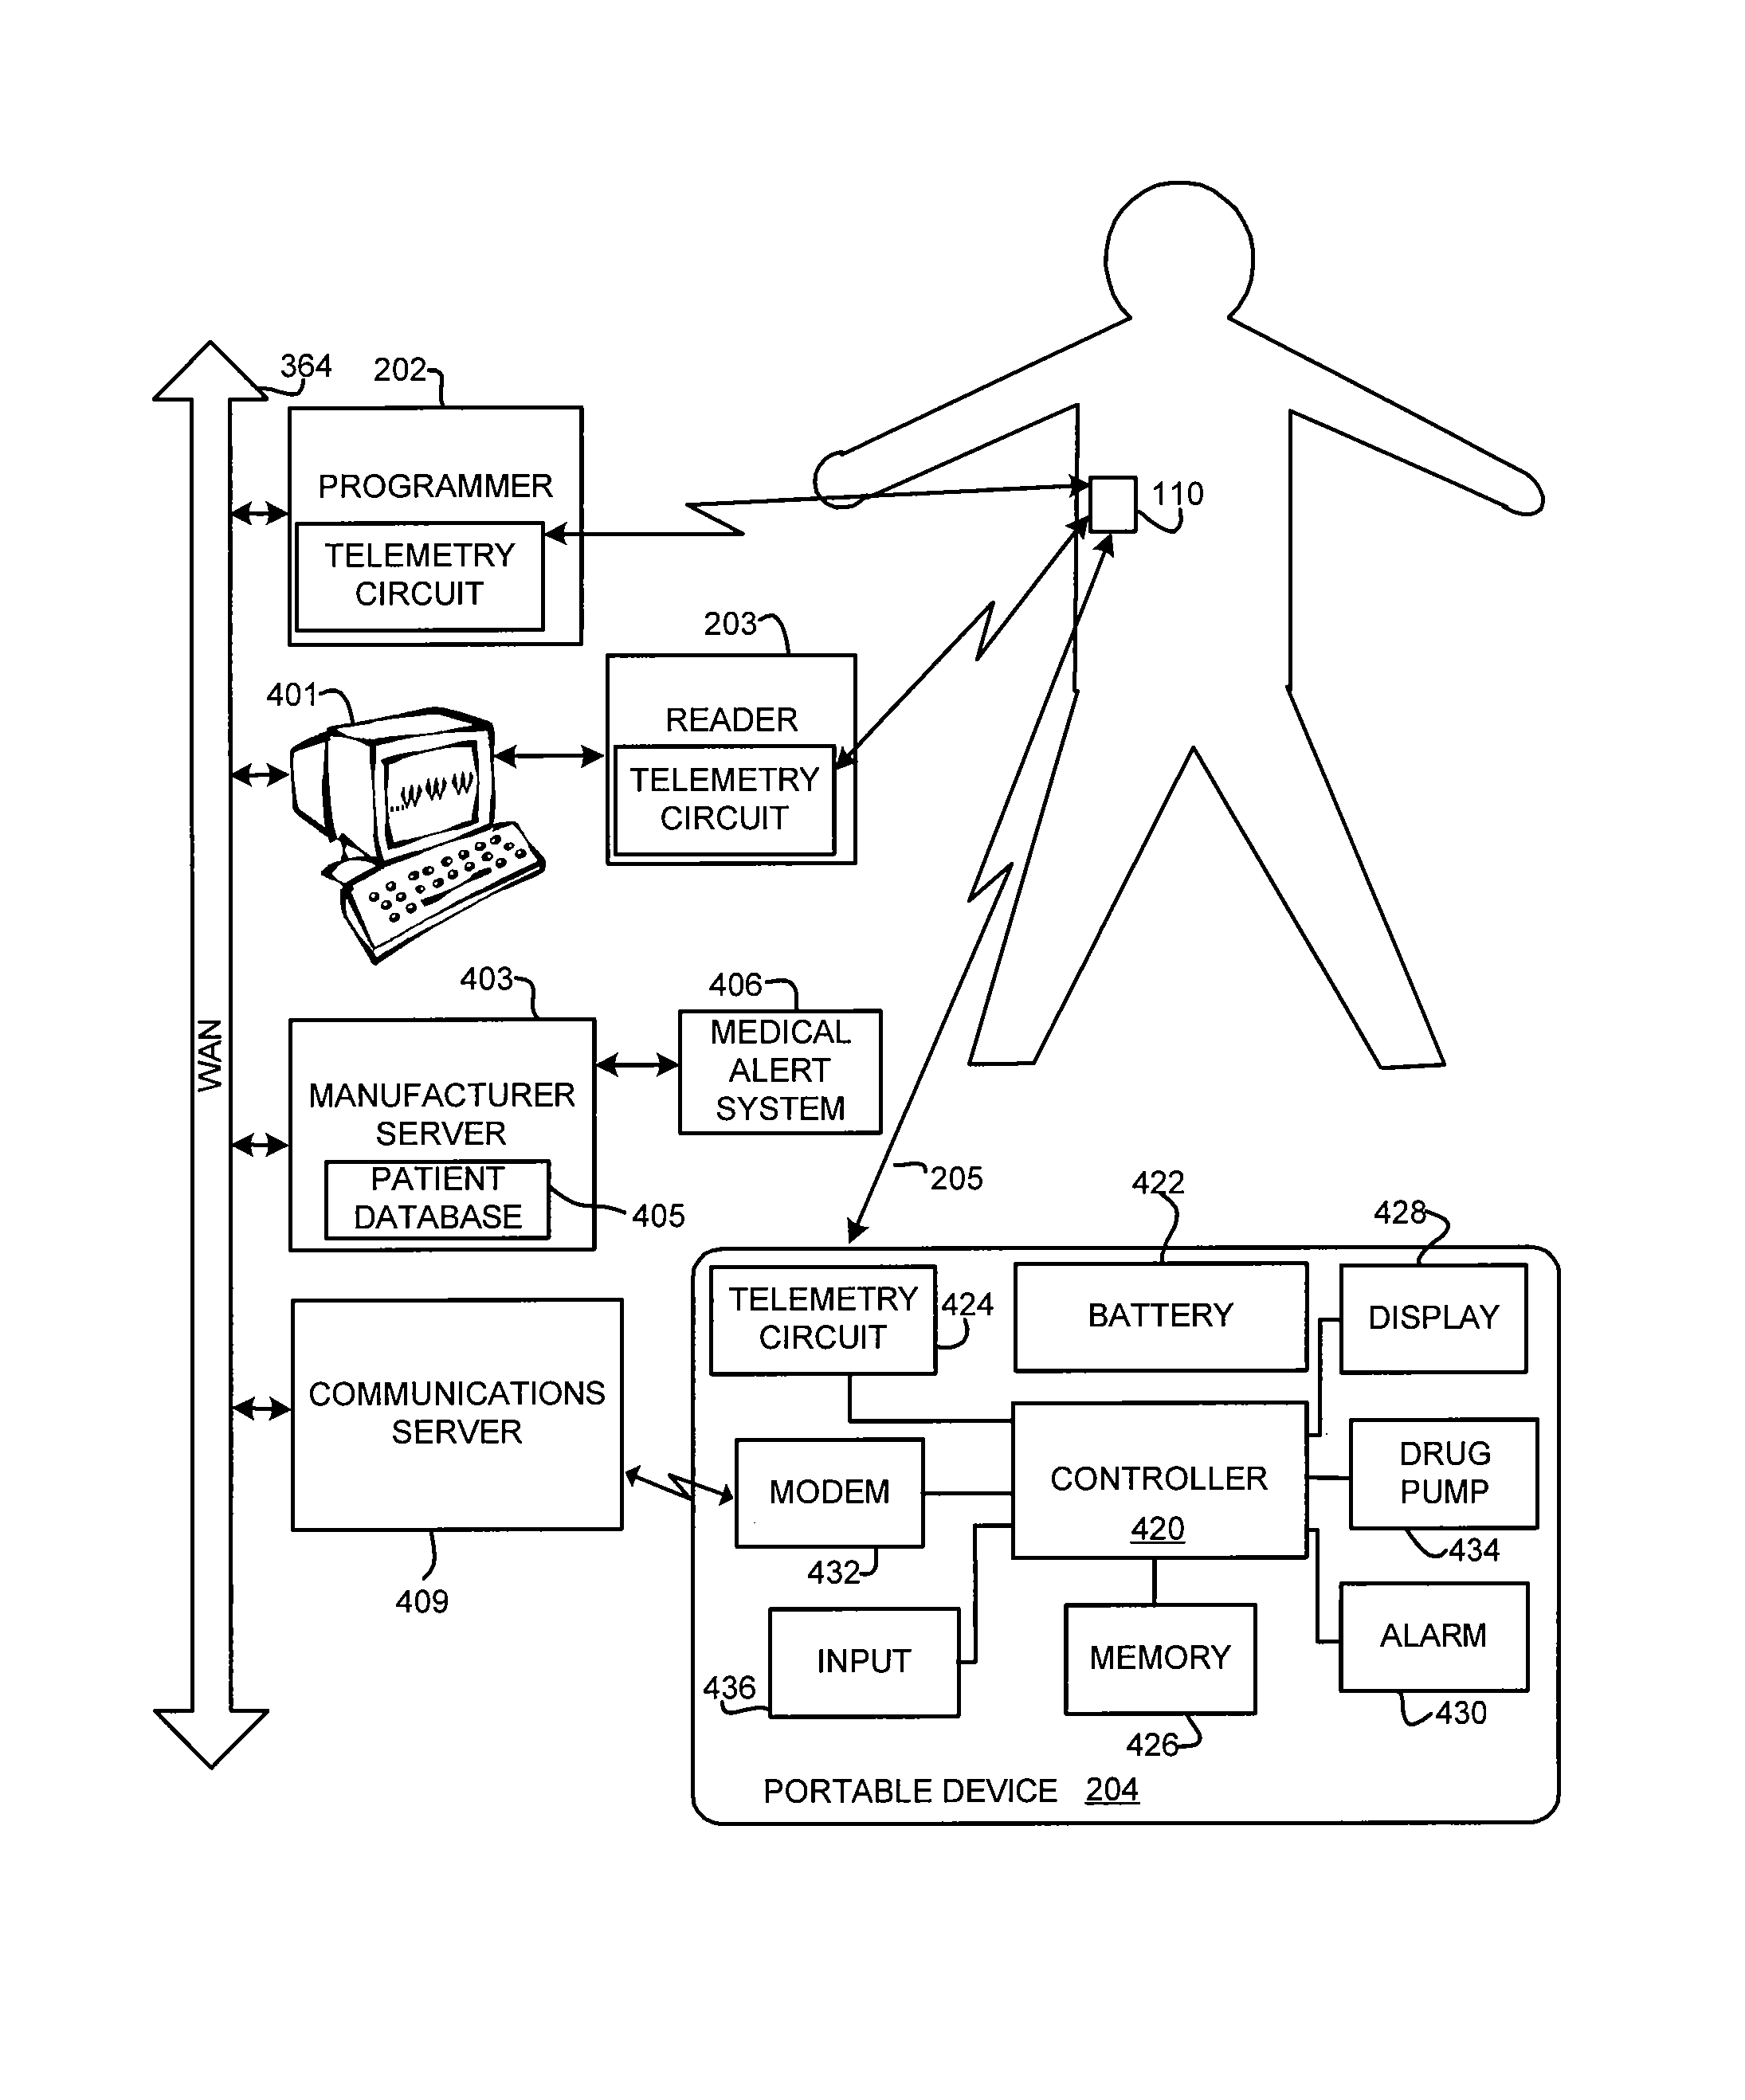 Method and apparatus for monitoring arrythmogenic effects of medications using an implantable device